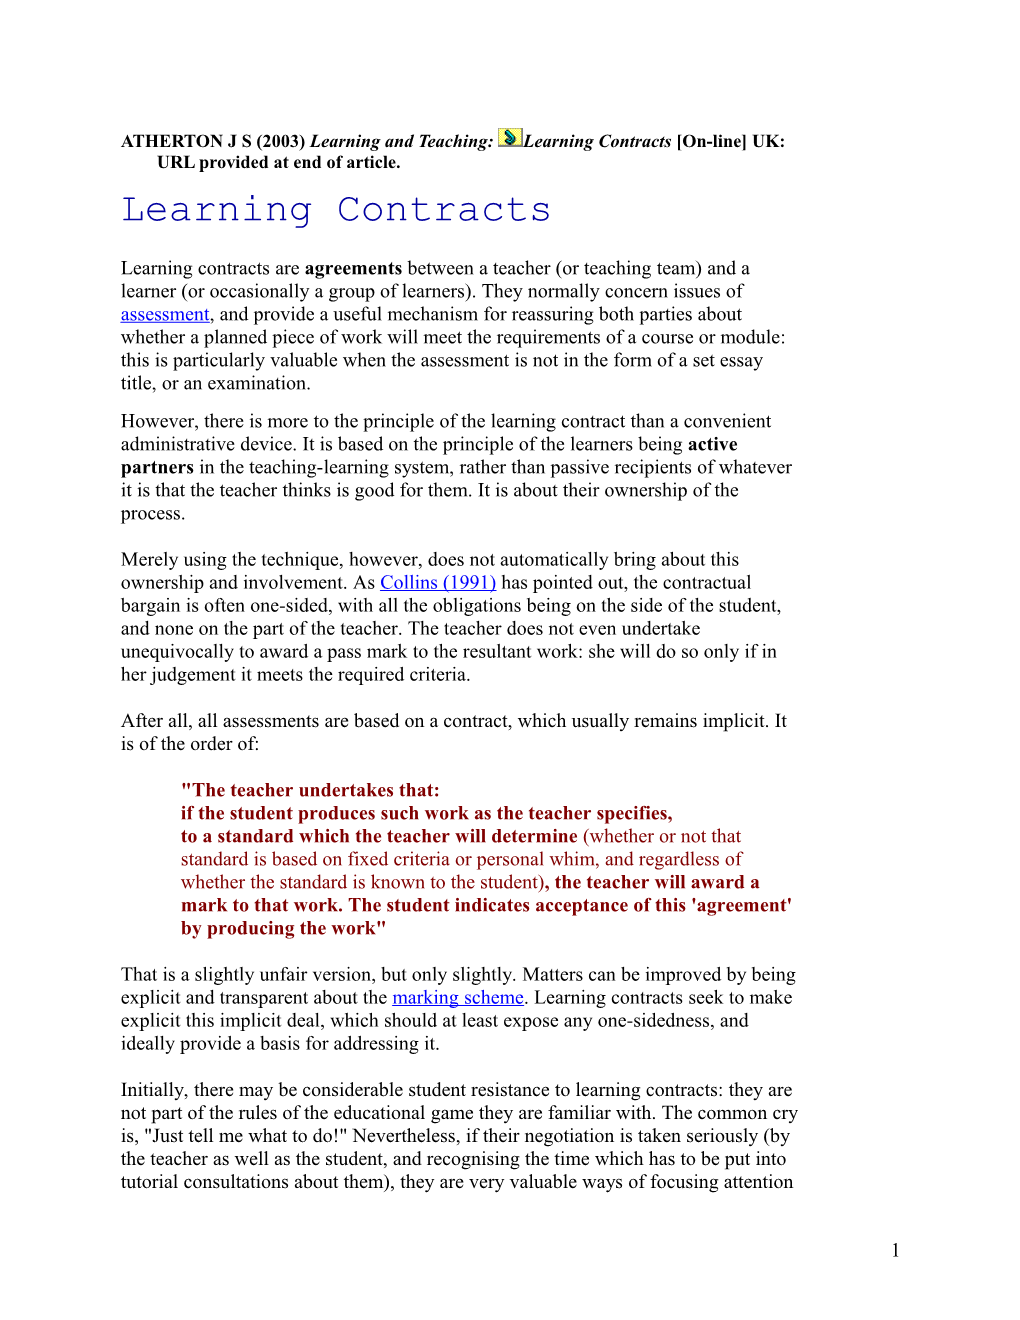 ATHERTON J S (2003) Learning and Teaching: Learning Contracts On-Line UK: URL Provided